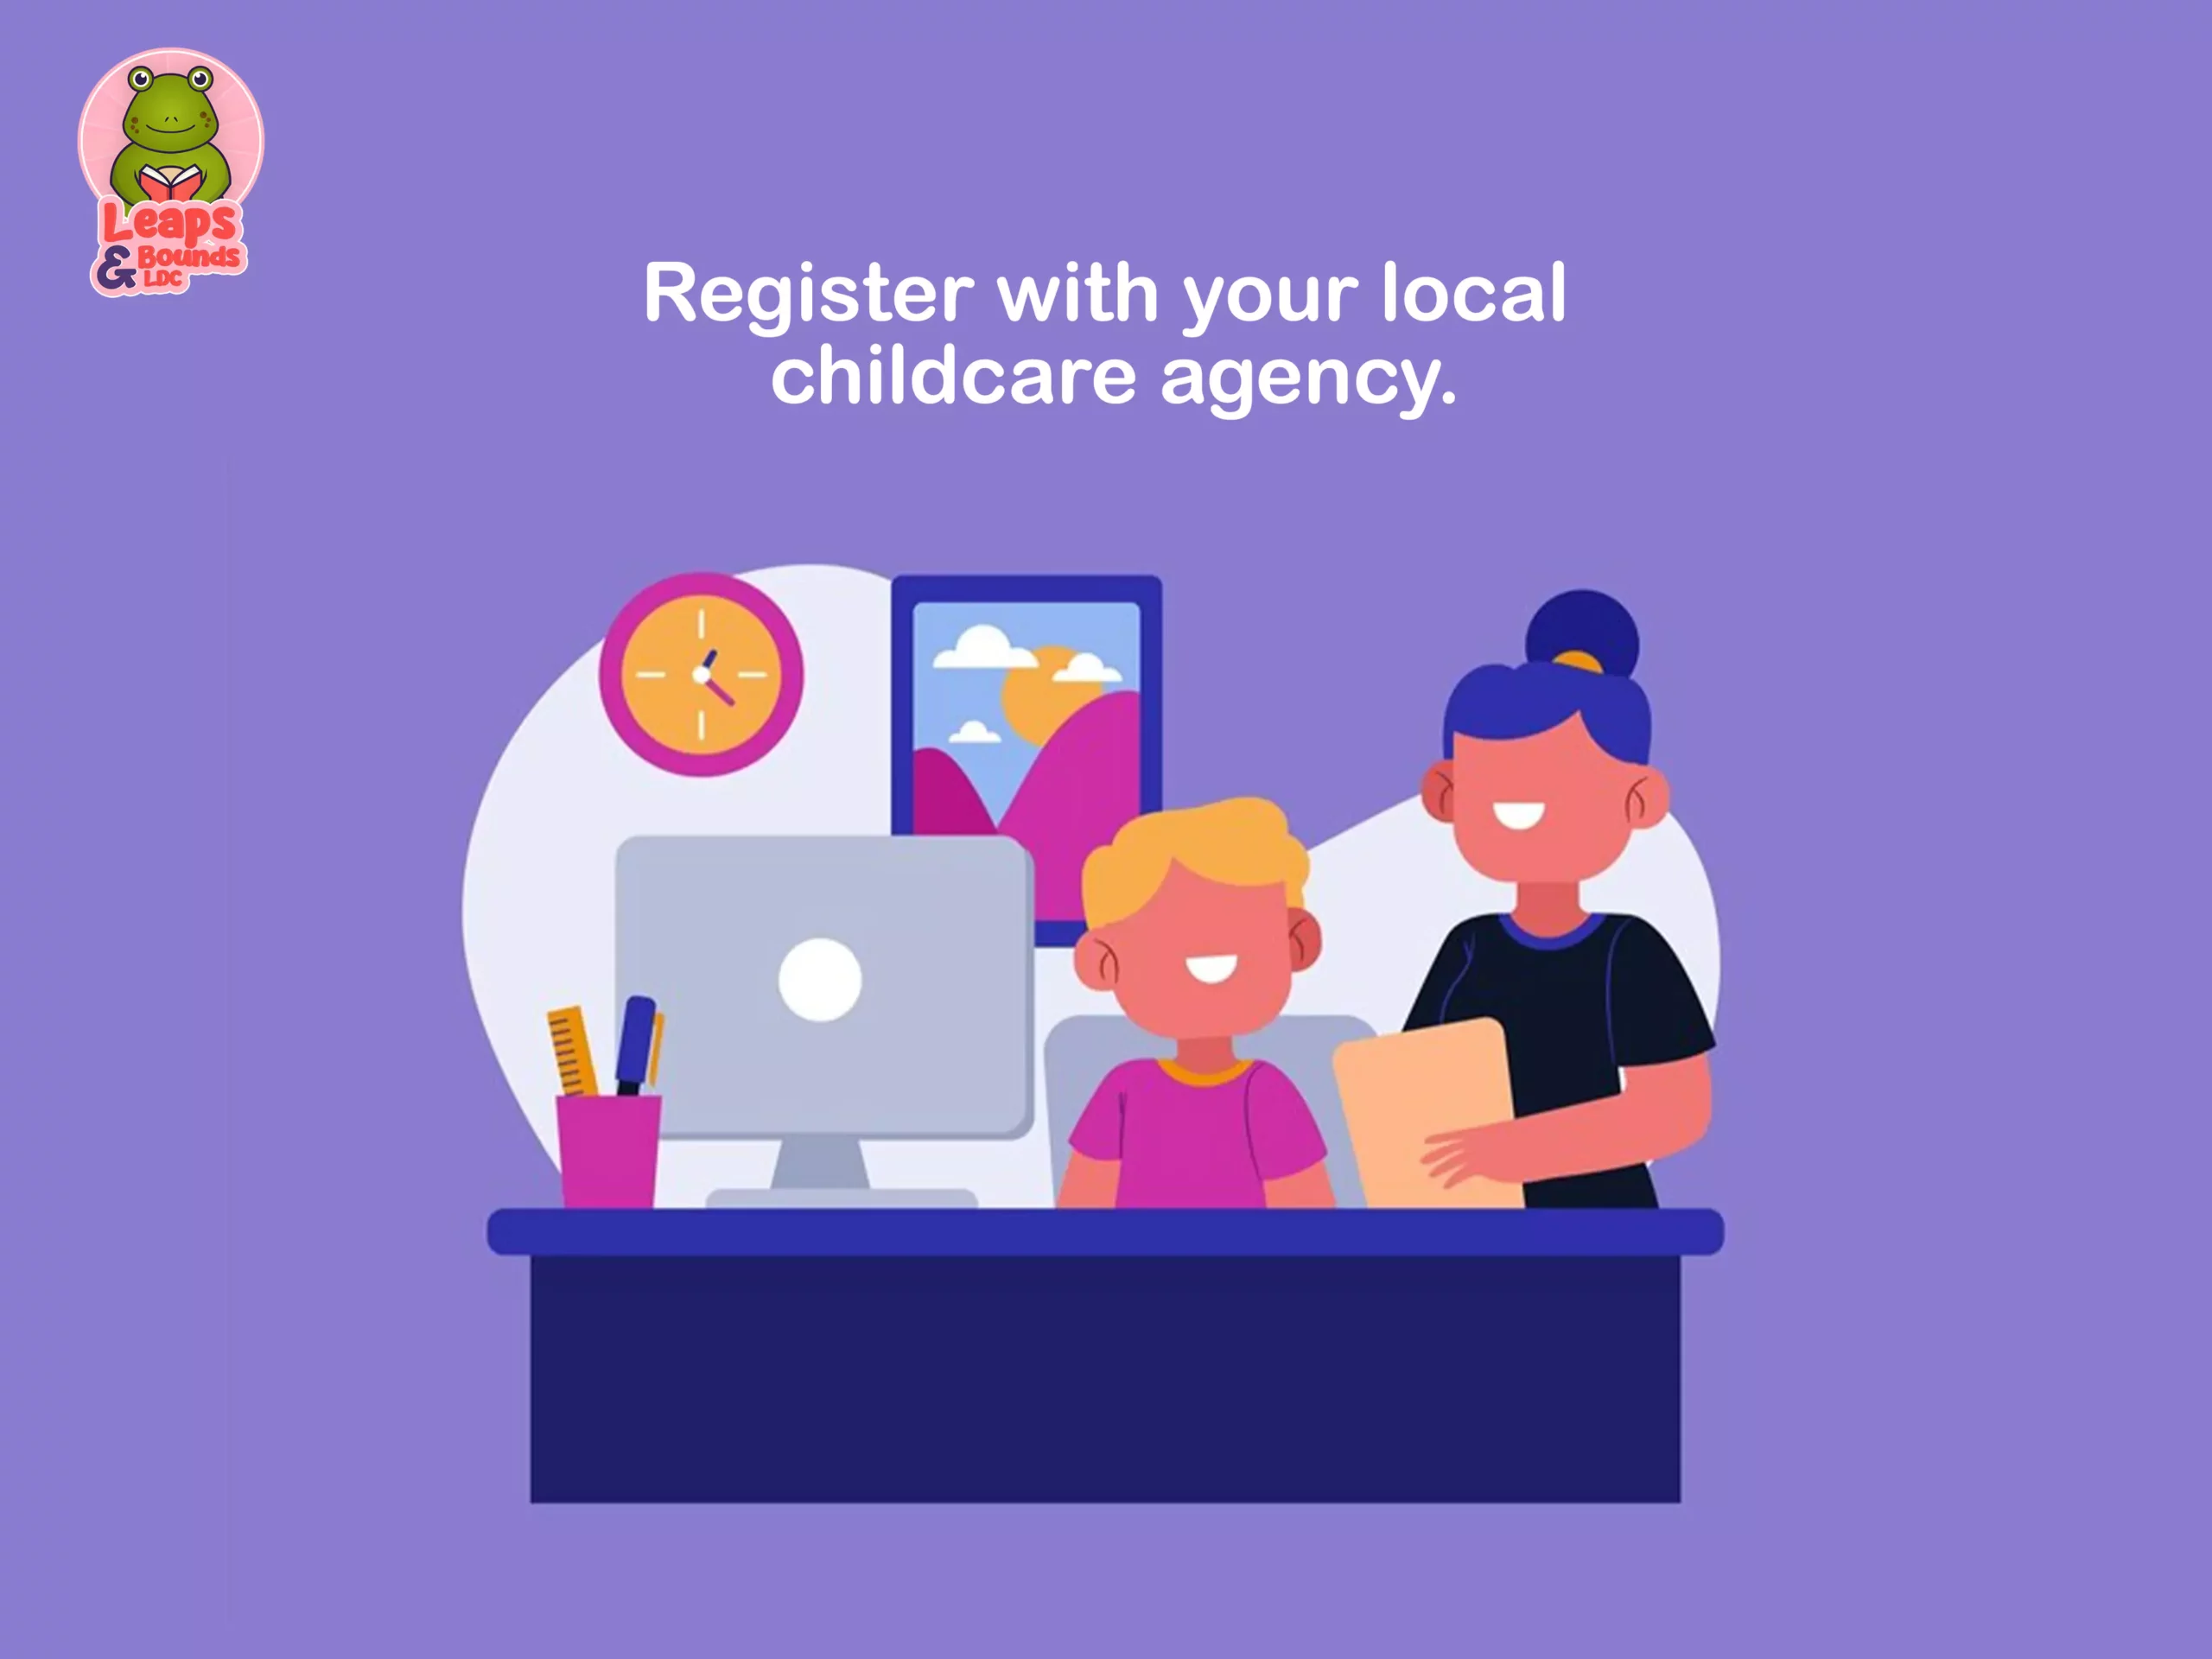 Register with your local childcare agency